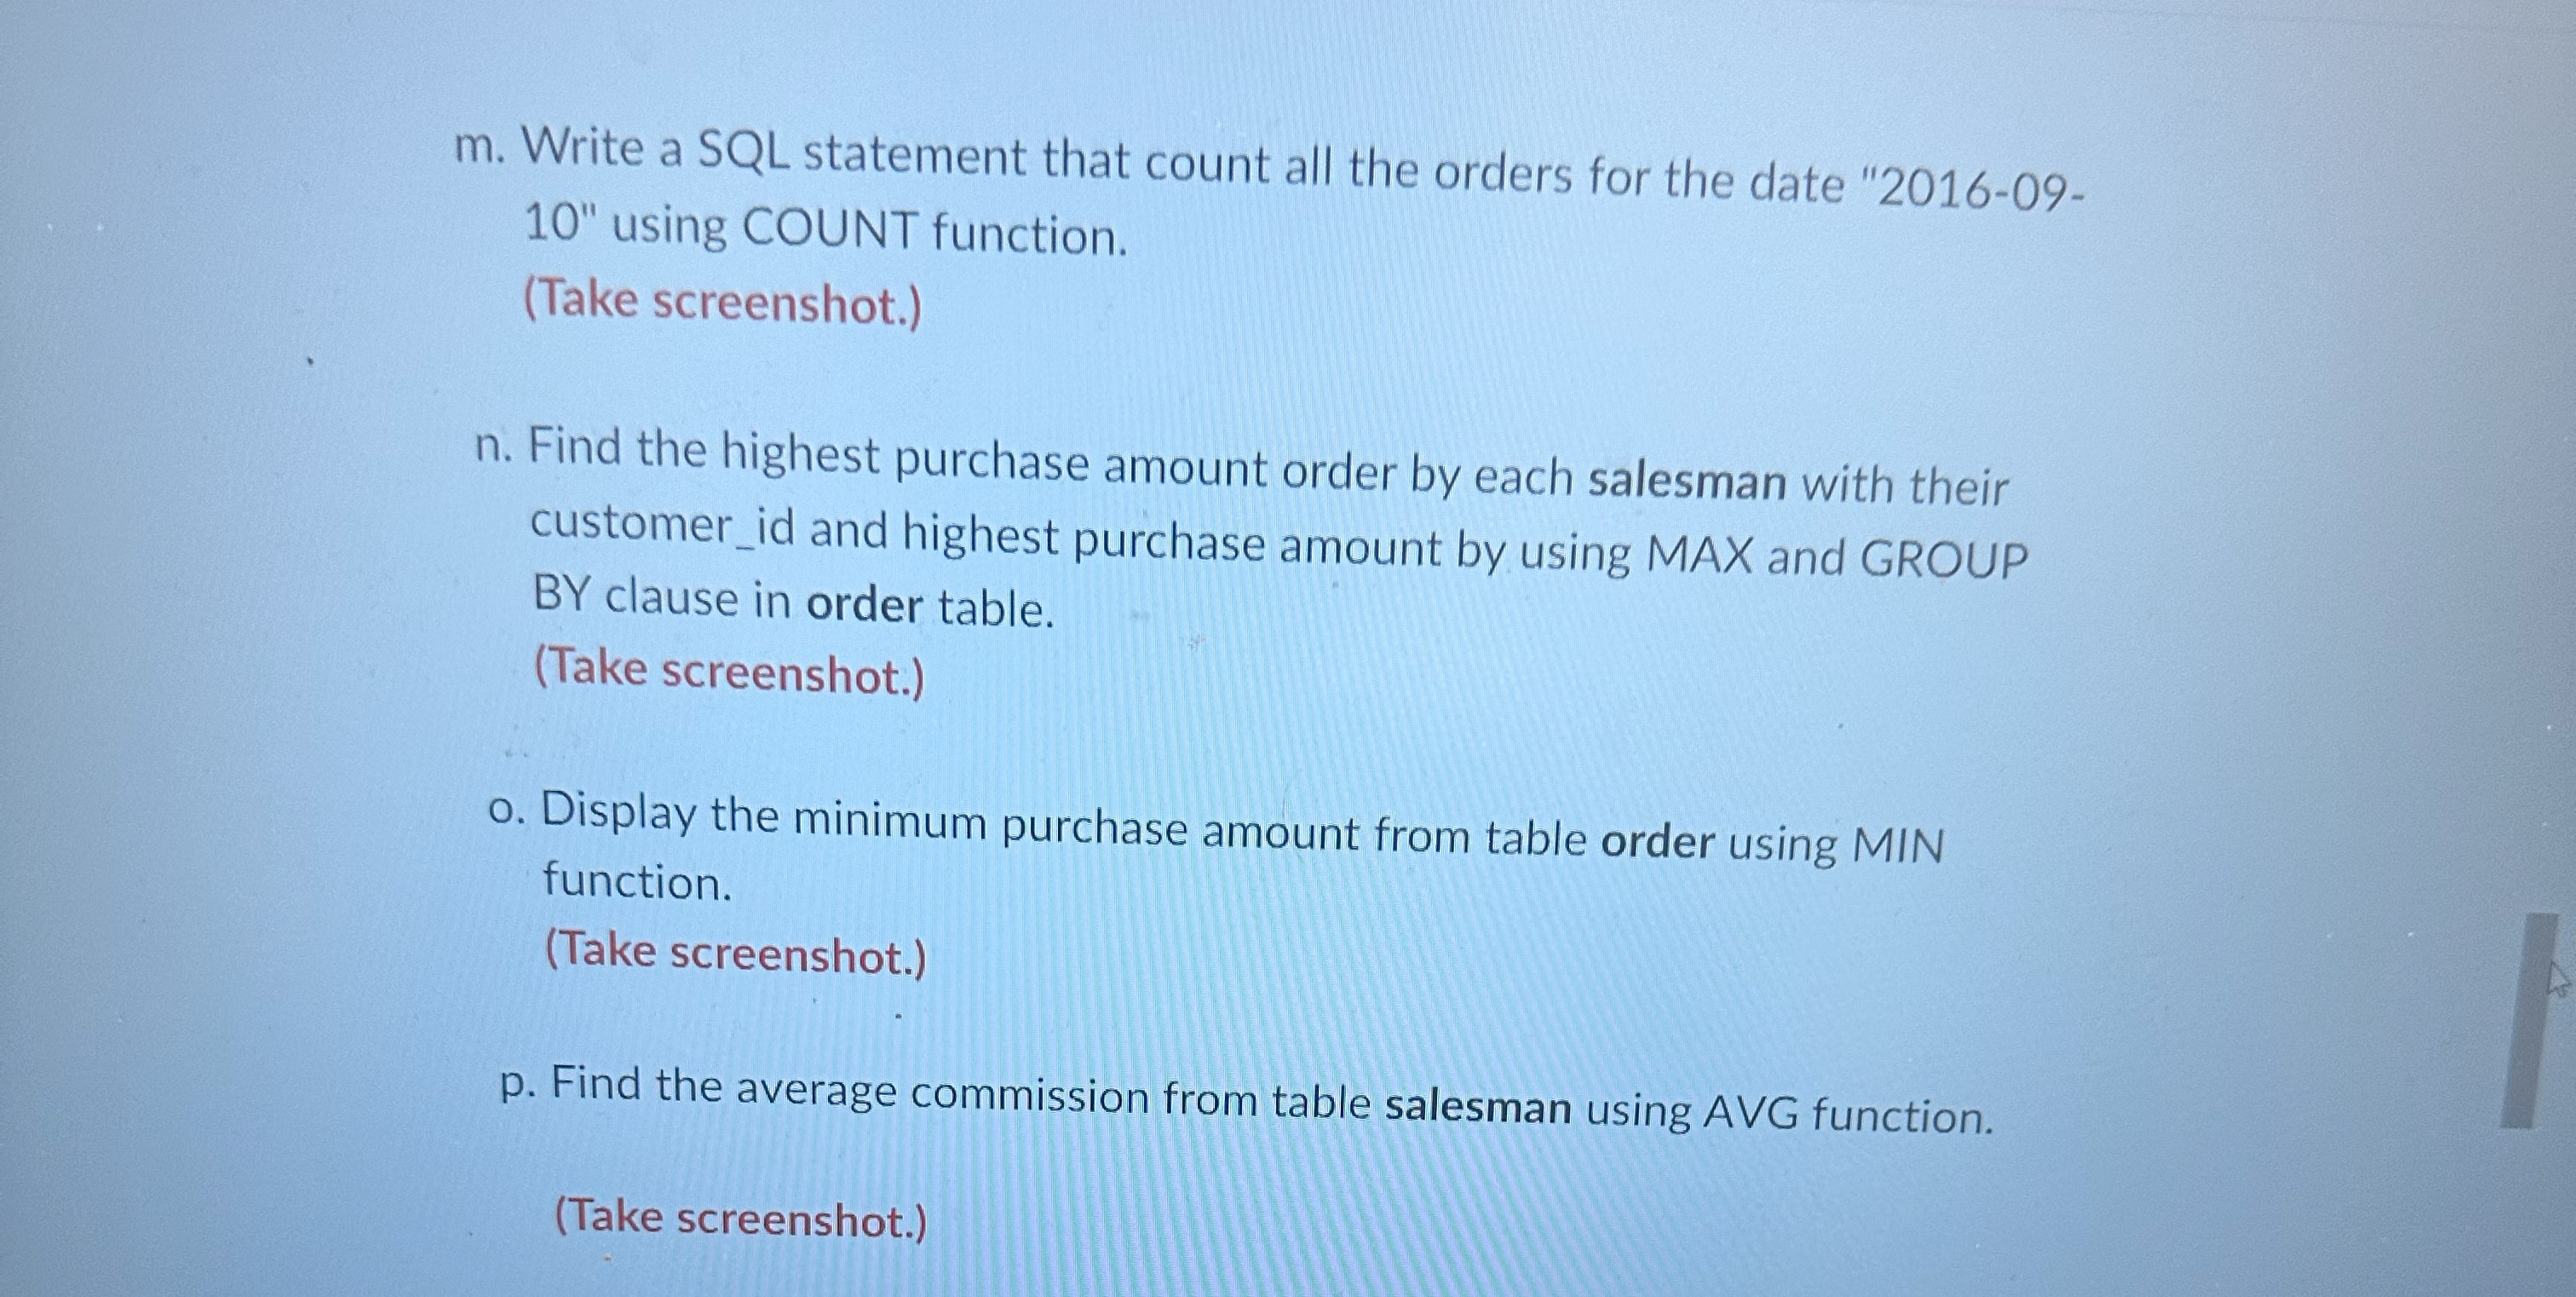 m. Write a SQL statement that count all the orders for the date "2016-09- 10" using COUNT function. (Take